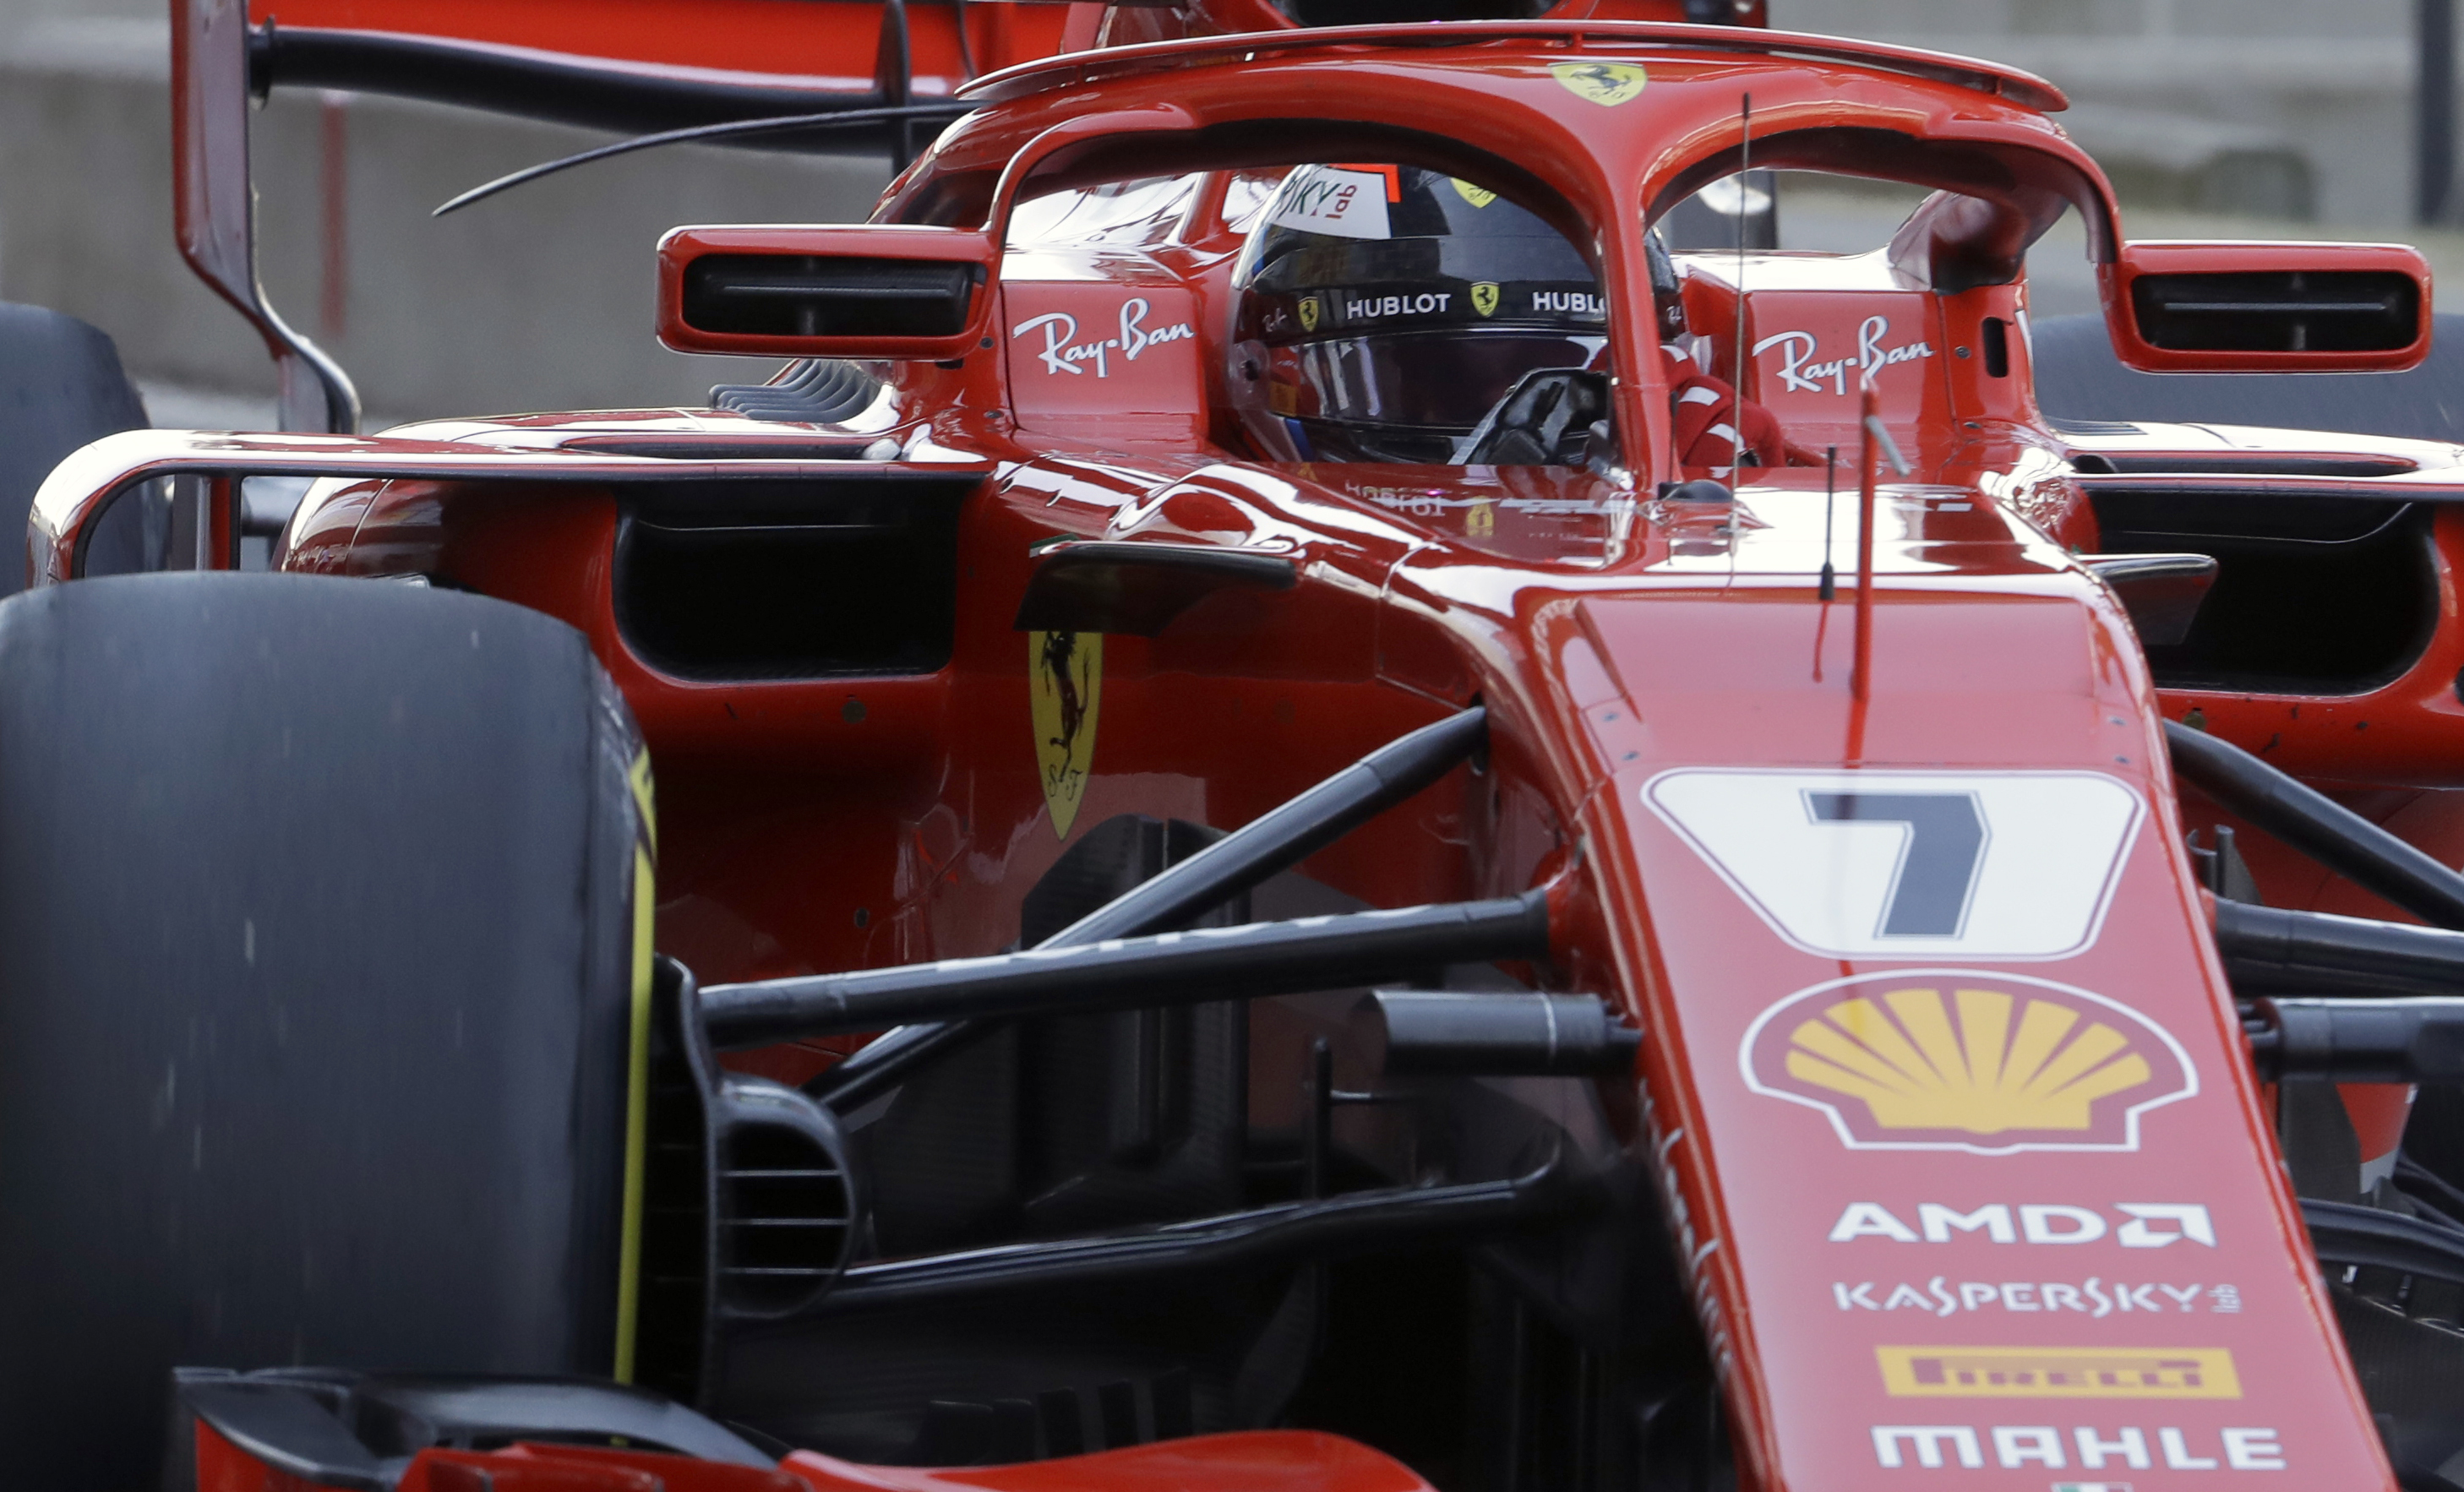 Ferrari driver Kimi Raikkonen of Finland steers his car during the third free practice at the Silverstone racetrack, Silverstone, England, Saturday, July 7, 2018. The British Formula One Grand Prix will be held on Sunday. (AP Photo/Luca Bruno)